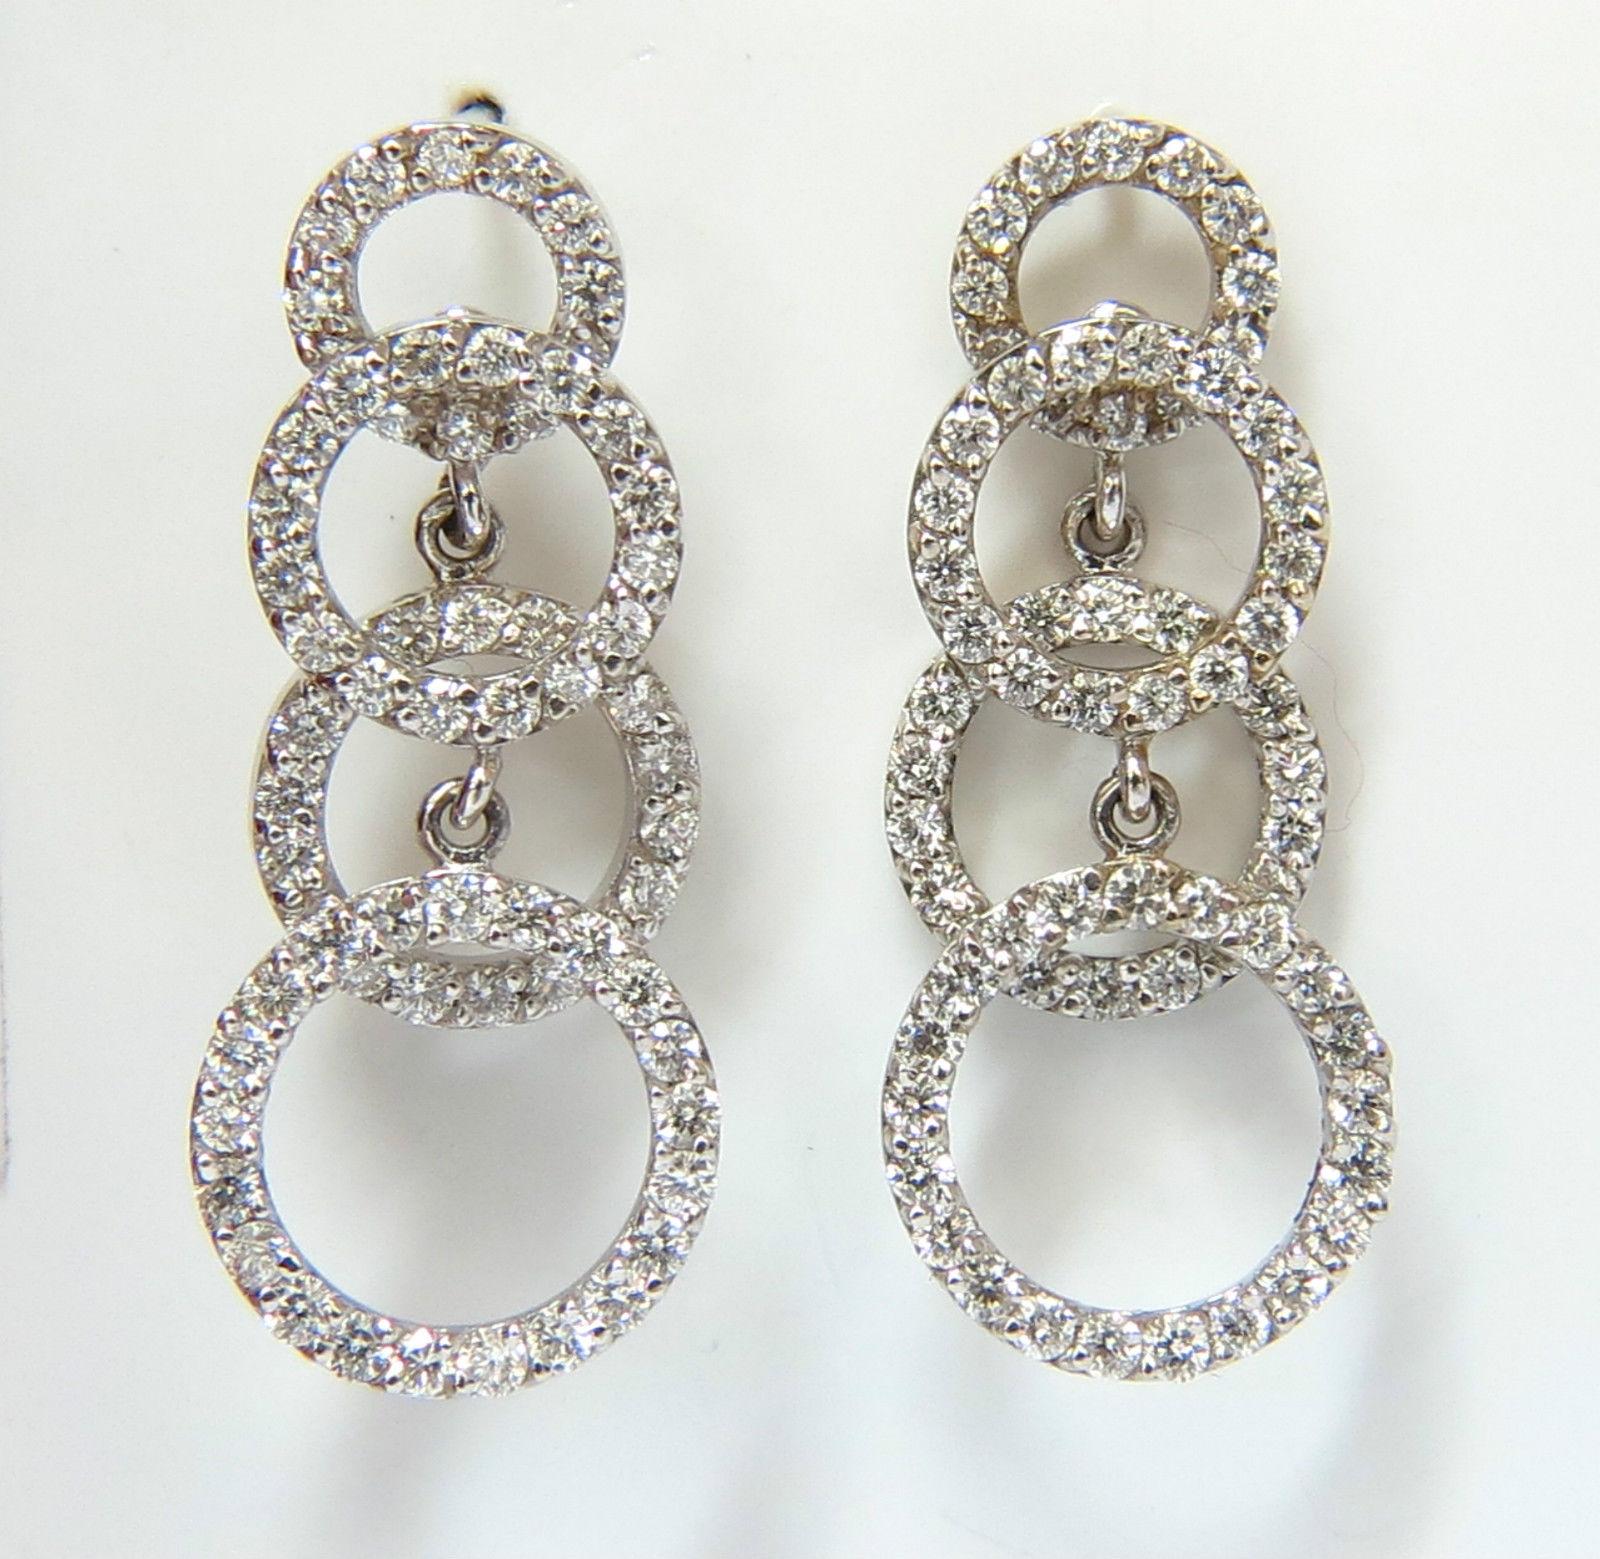 Modern Dangle Deco

Diamond dangle earrings

2.00ct. Diamonds 

G-H color, Vs-2 Si-1 clarity.

14kt. white gold

7.1 grams.

Measures:

30mm long &

12.40mm wide at lower circle

8.12mm at upper circle

$5200 appraisal will accompany